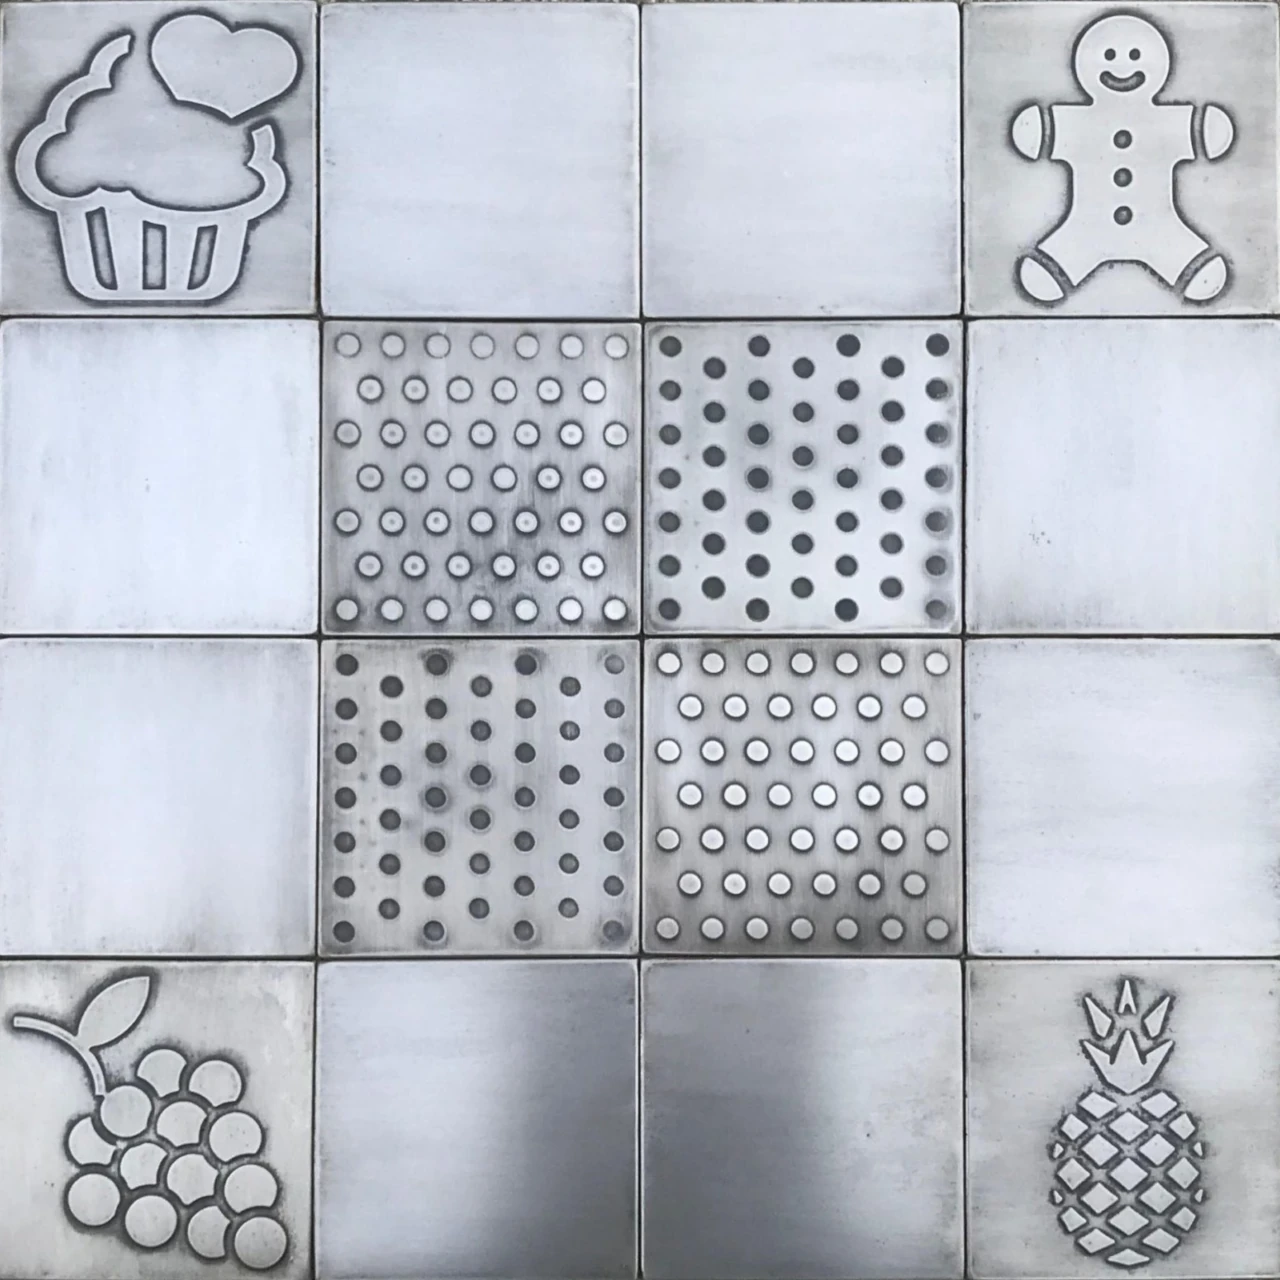 Mosaic tiles with cookies and fruits2